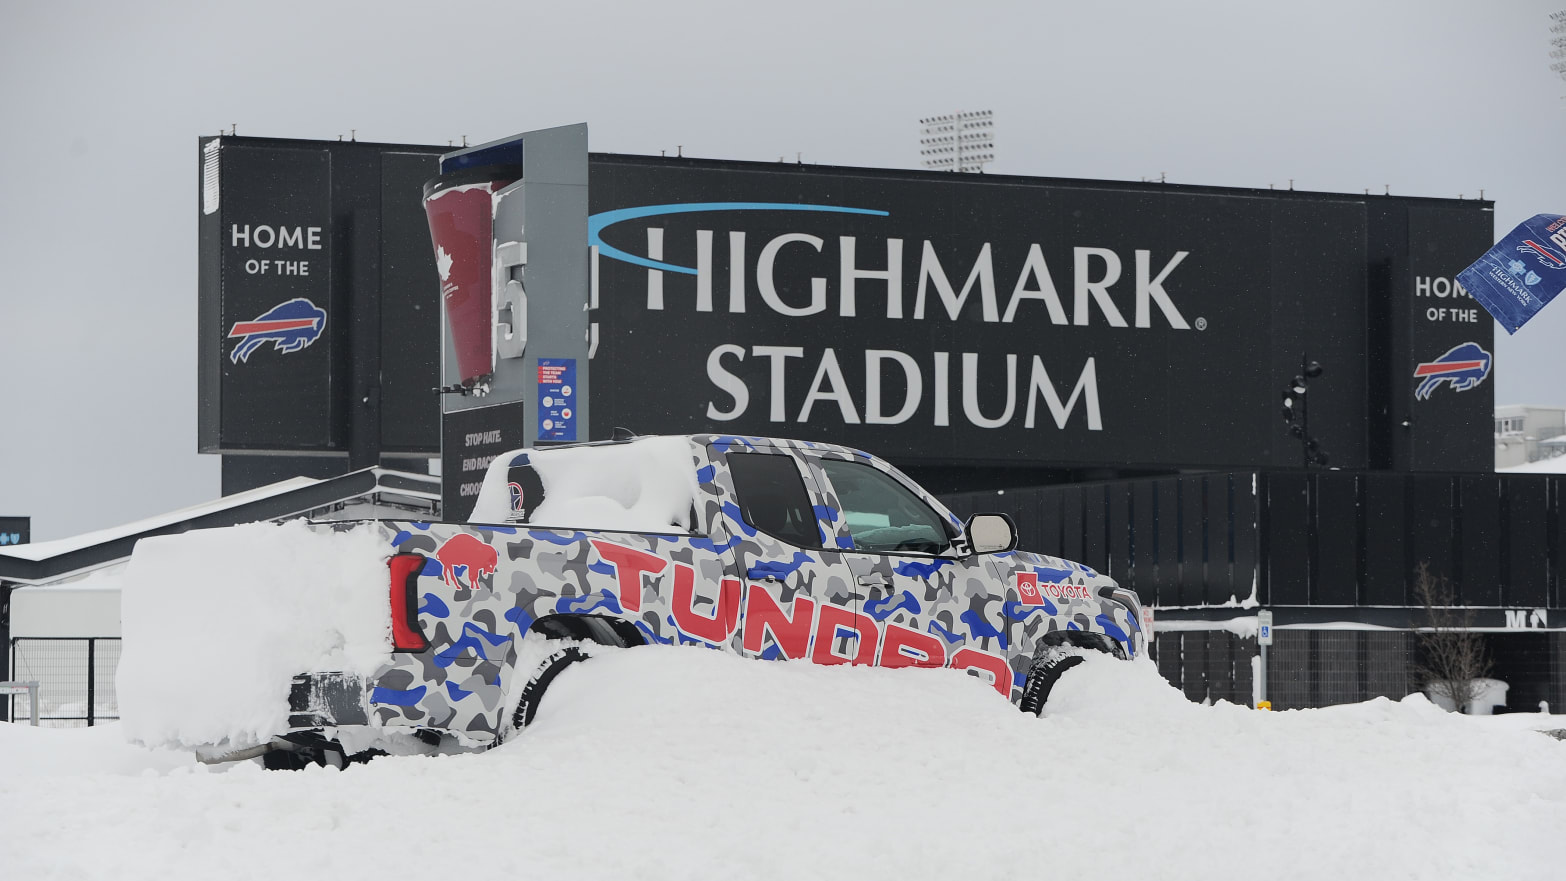 Overview of the Rescheduled Bills Game